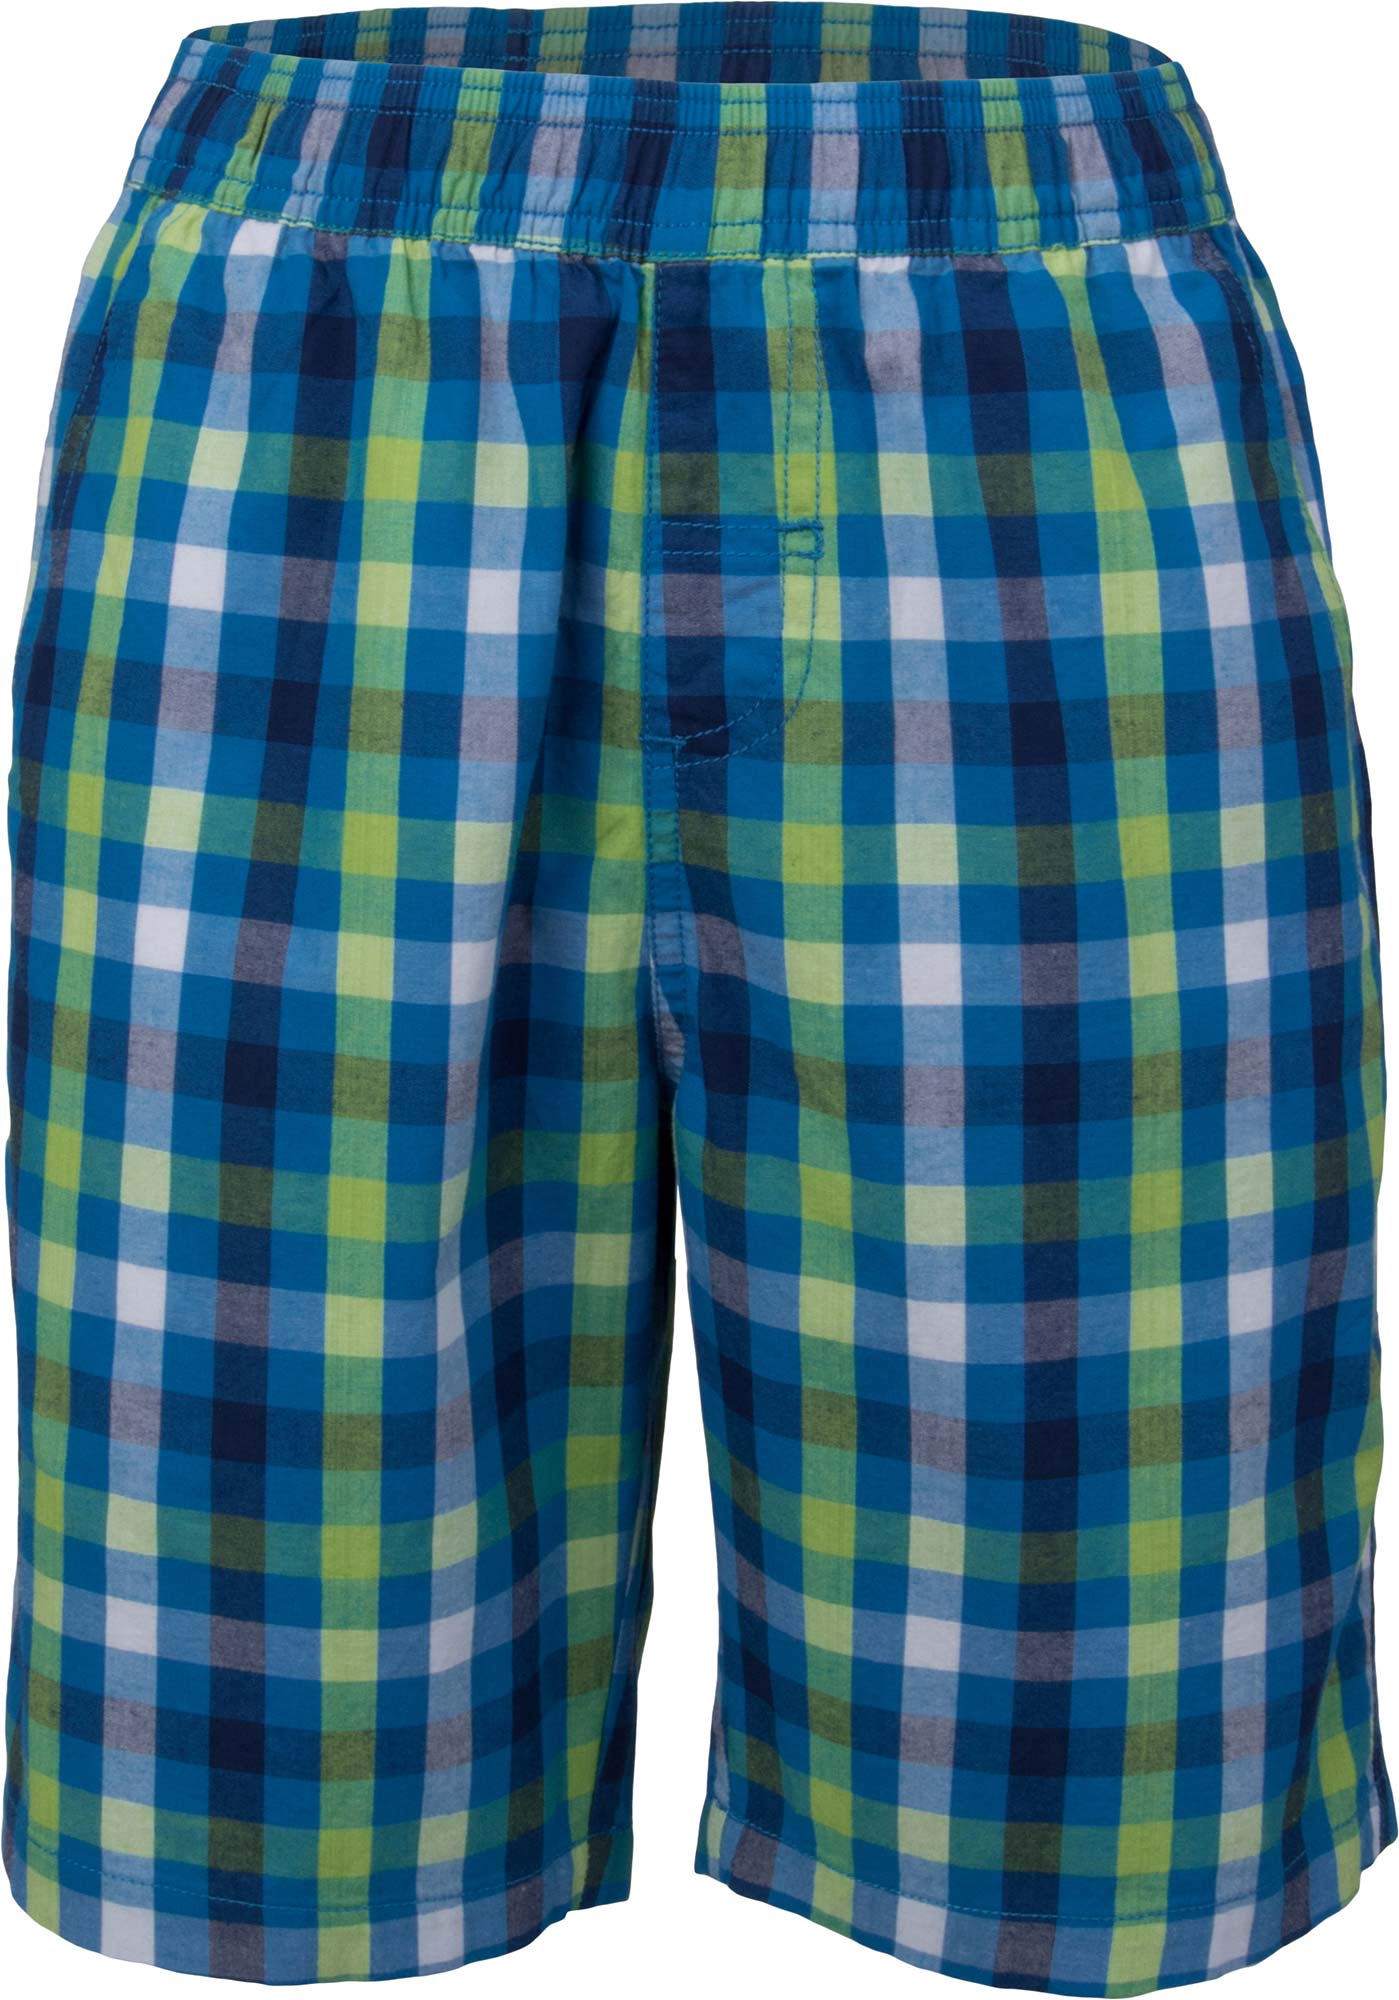 Boys’ shorts with checked pattern